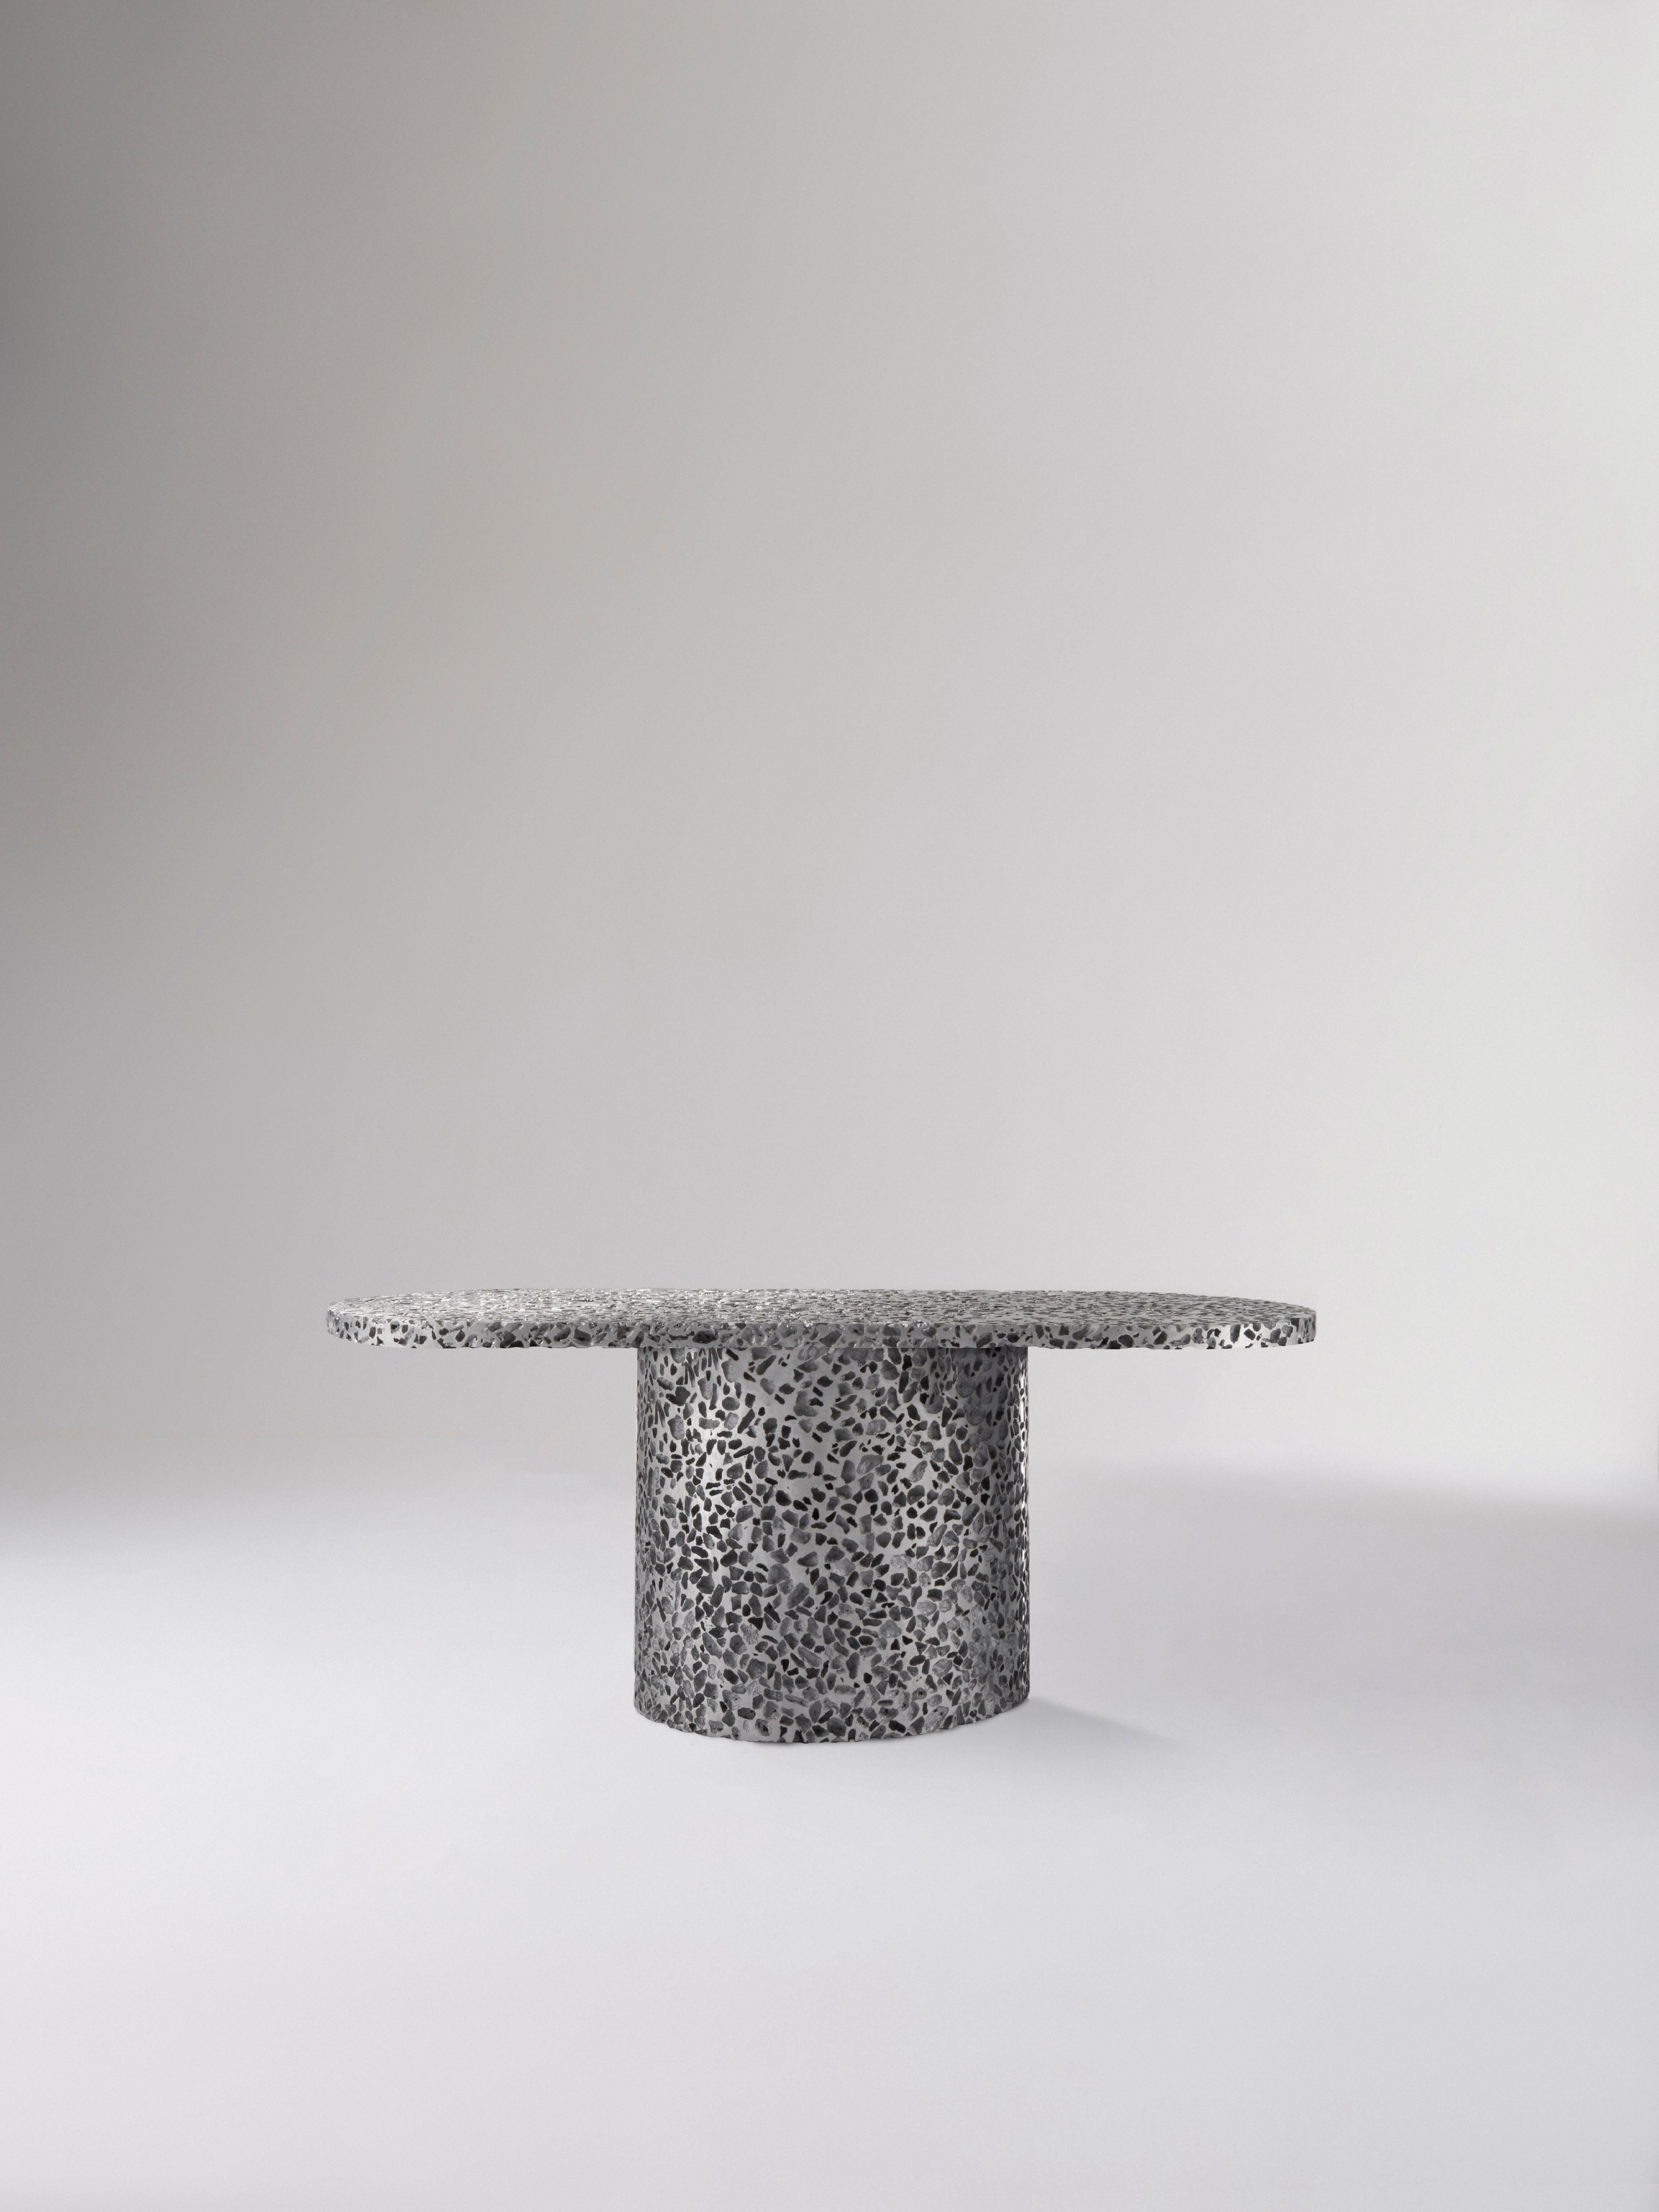 This coffee table is a functional piece of furniture, but it's also a diptych created from the microcosm of random structures of the open-cell aluminum foam and the severity and preciseness embedded in the industrial metal processes the humans have